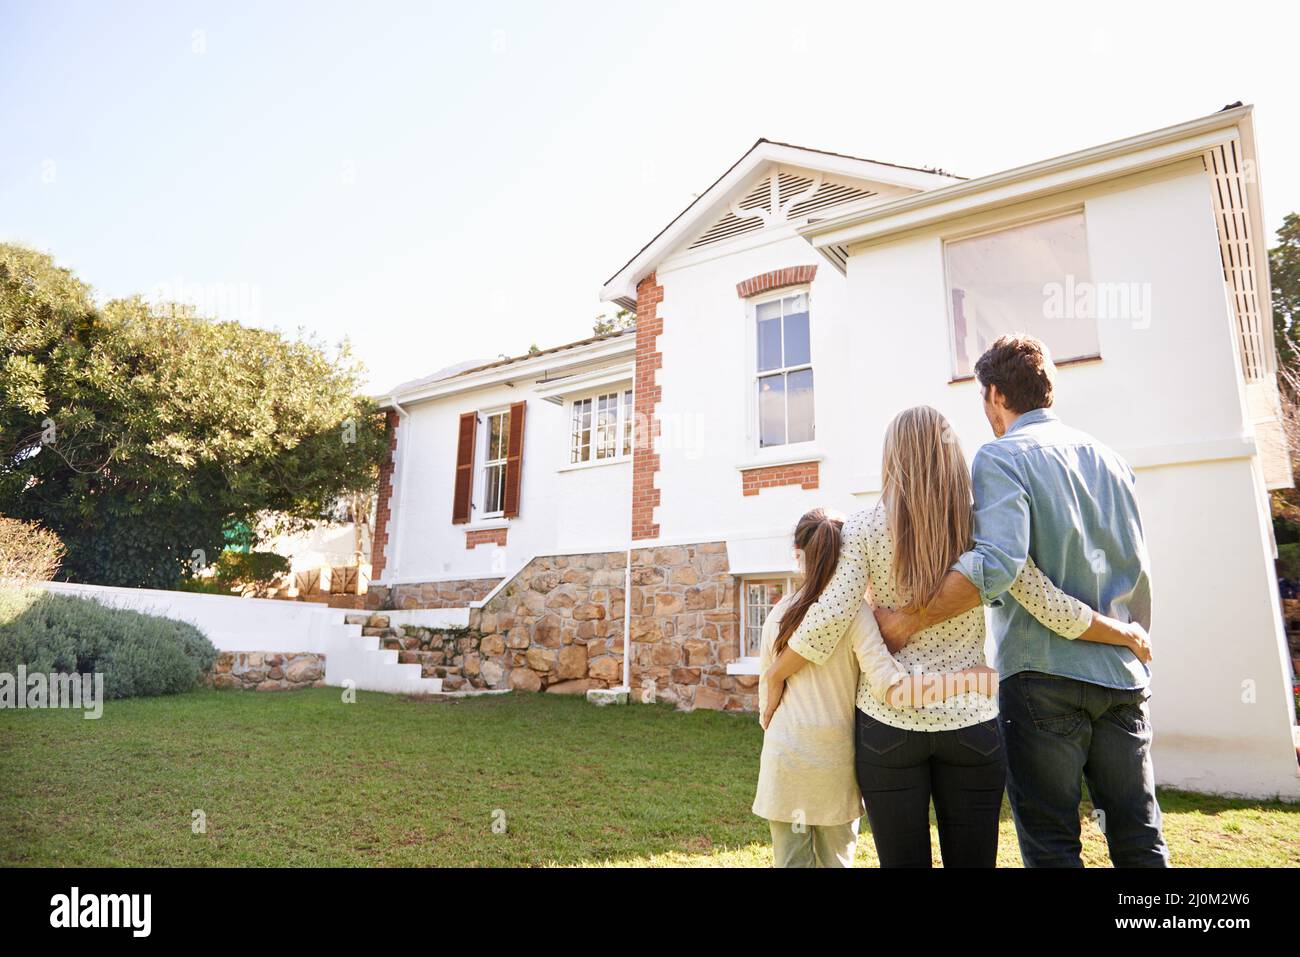 Welcome home. A family standing outdoors admiring their new home. Stock Photo